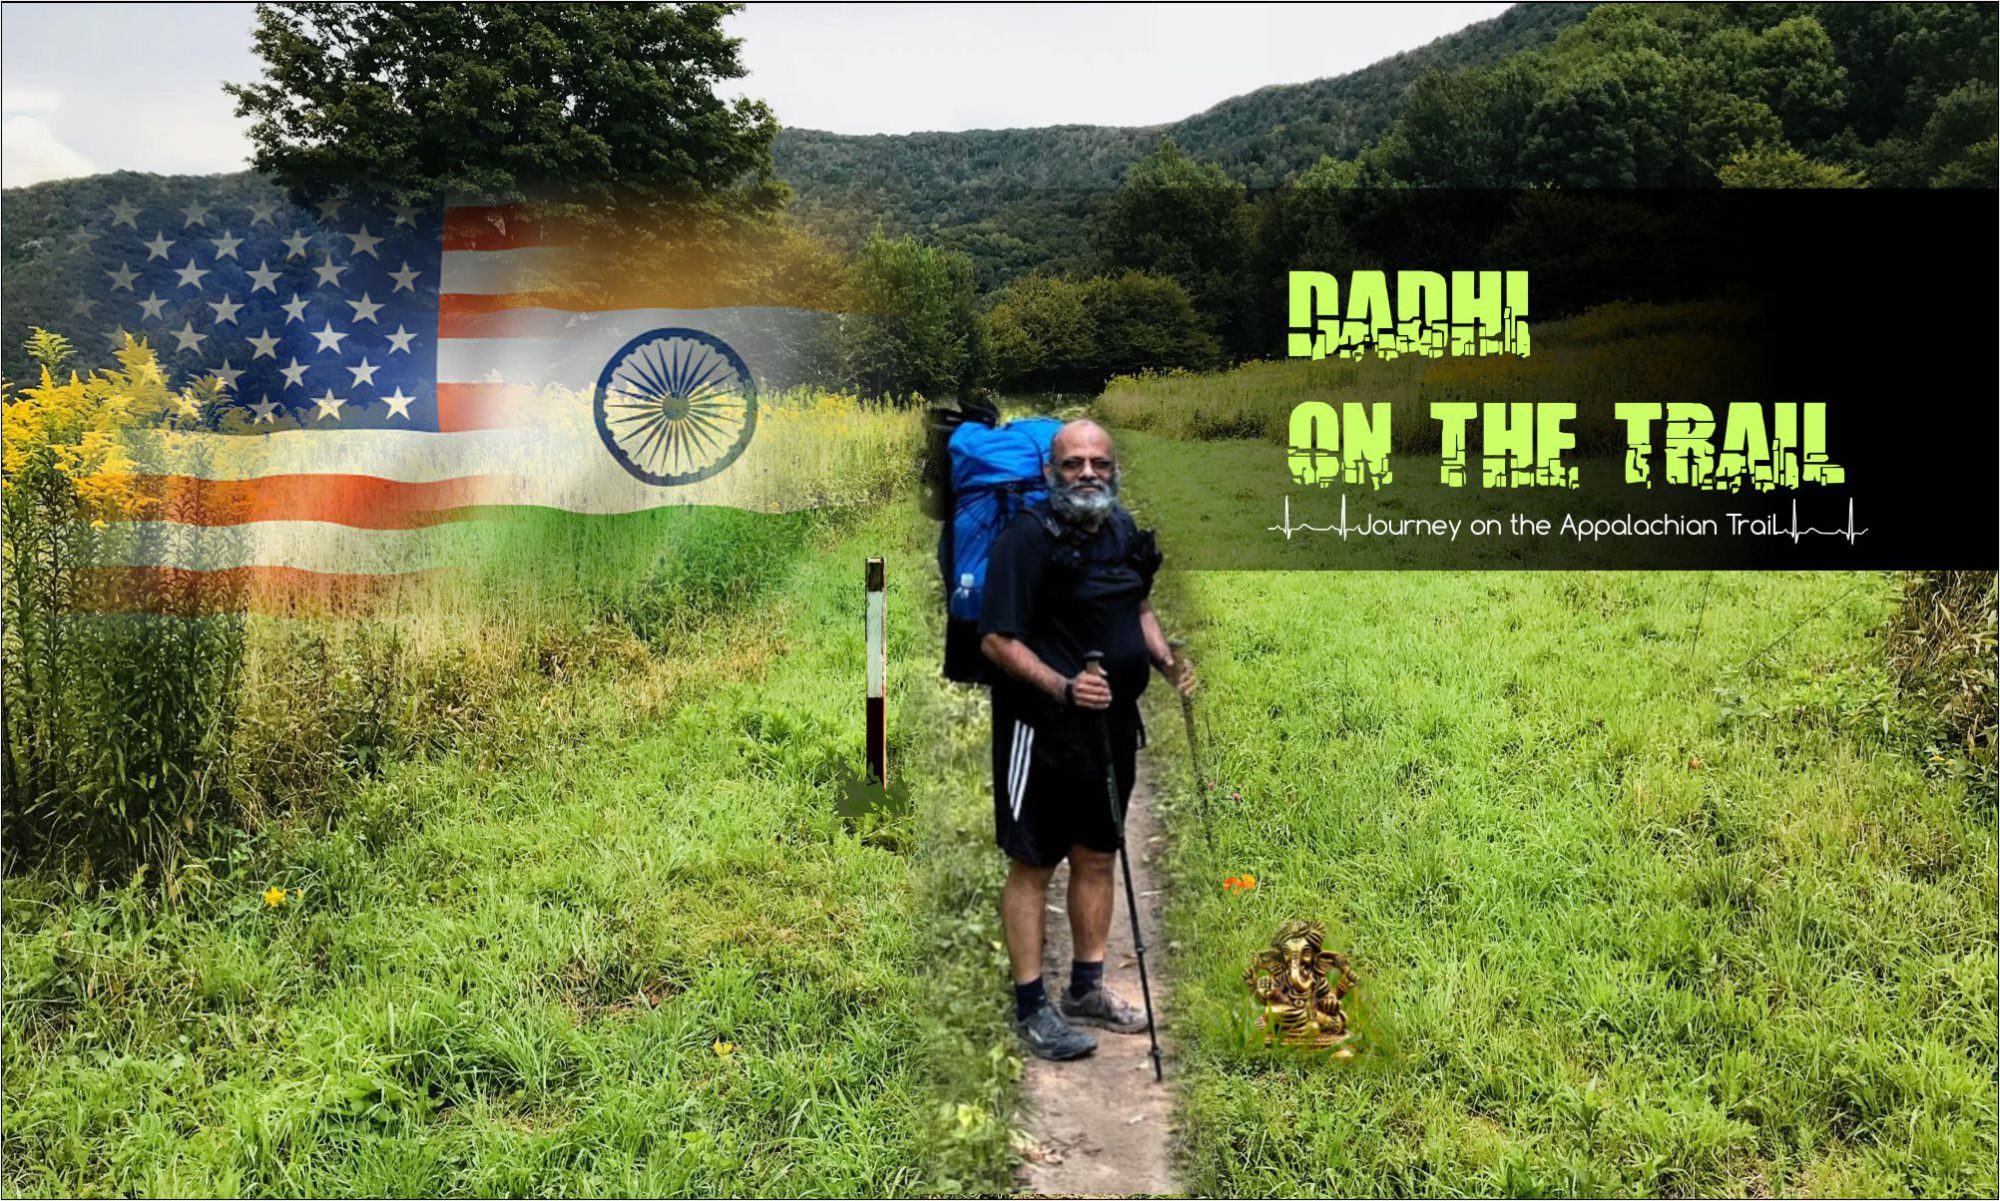 Dadhi on the trail